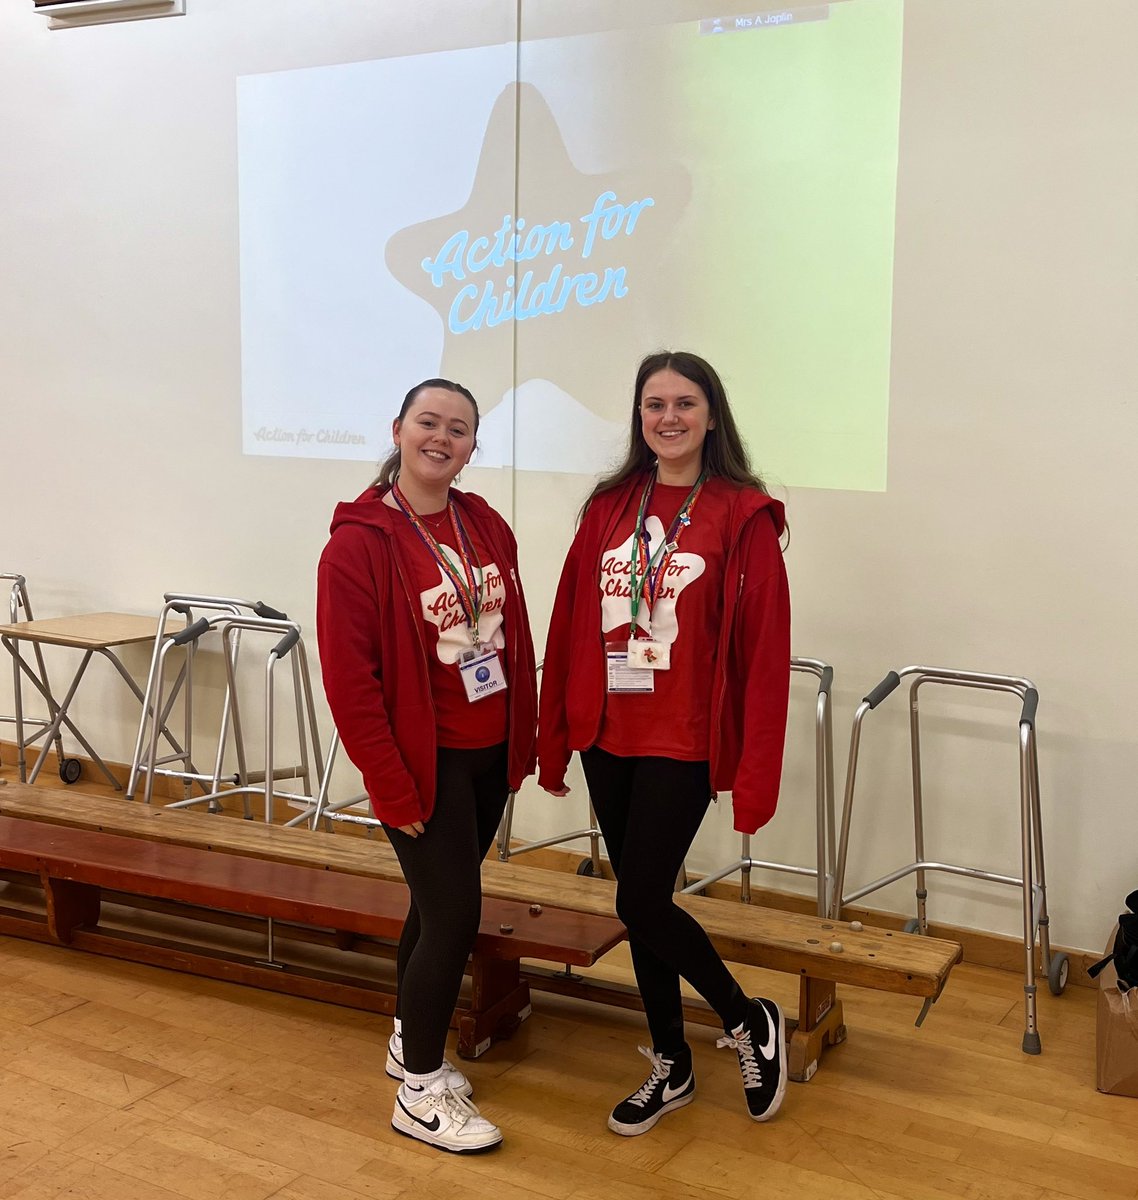 ⭐️Thank you for having us today @WirralGirls for our Blues assembly with Year 9. We are so excited to get the Blues Programme rolling in the new year ⭐️

@actnforchildren